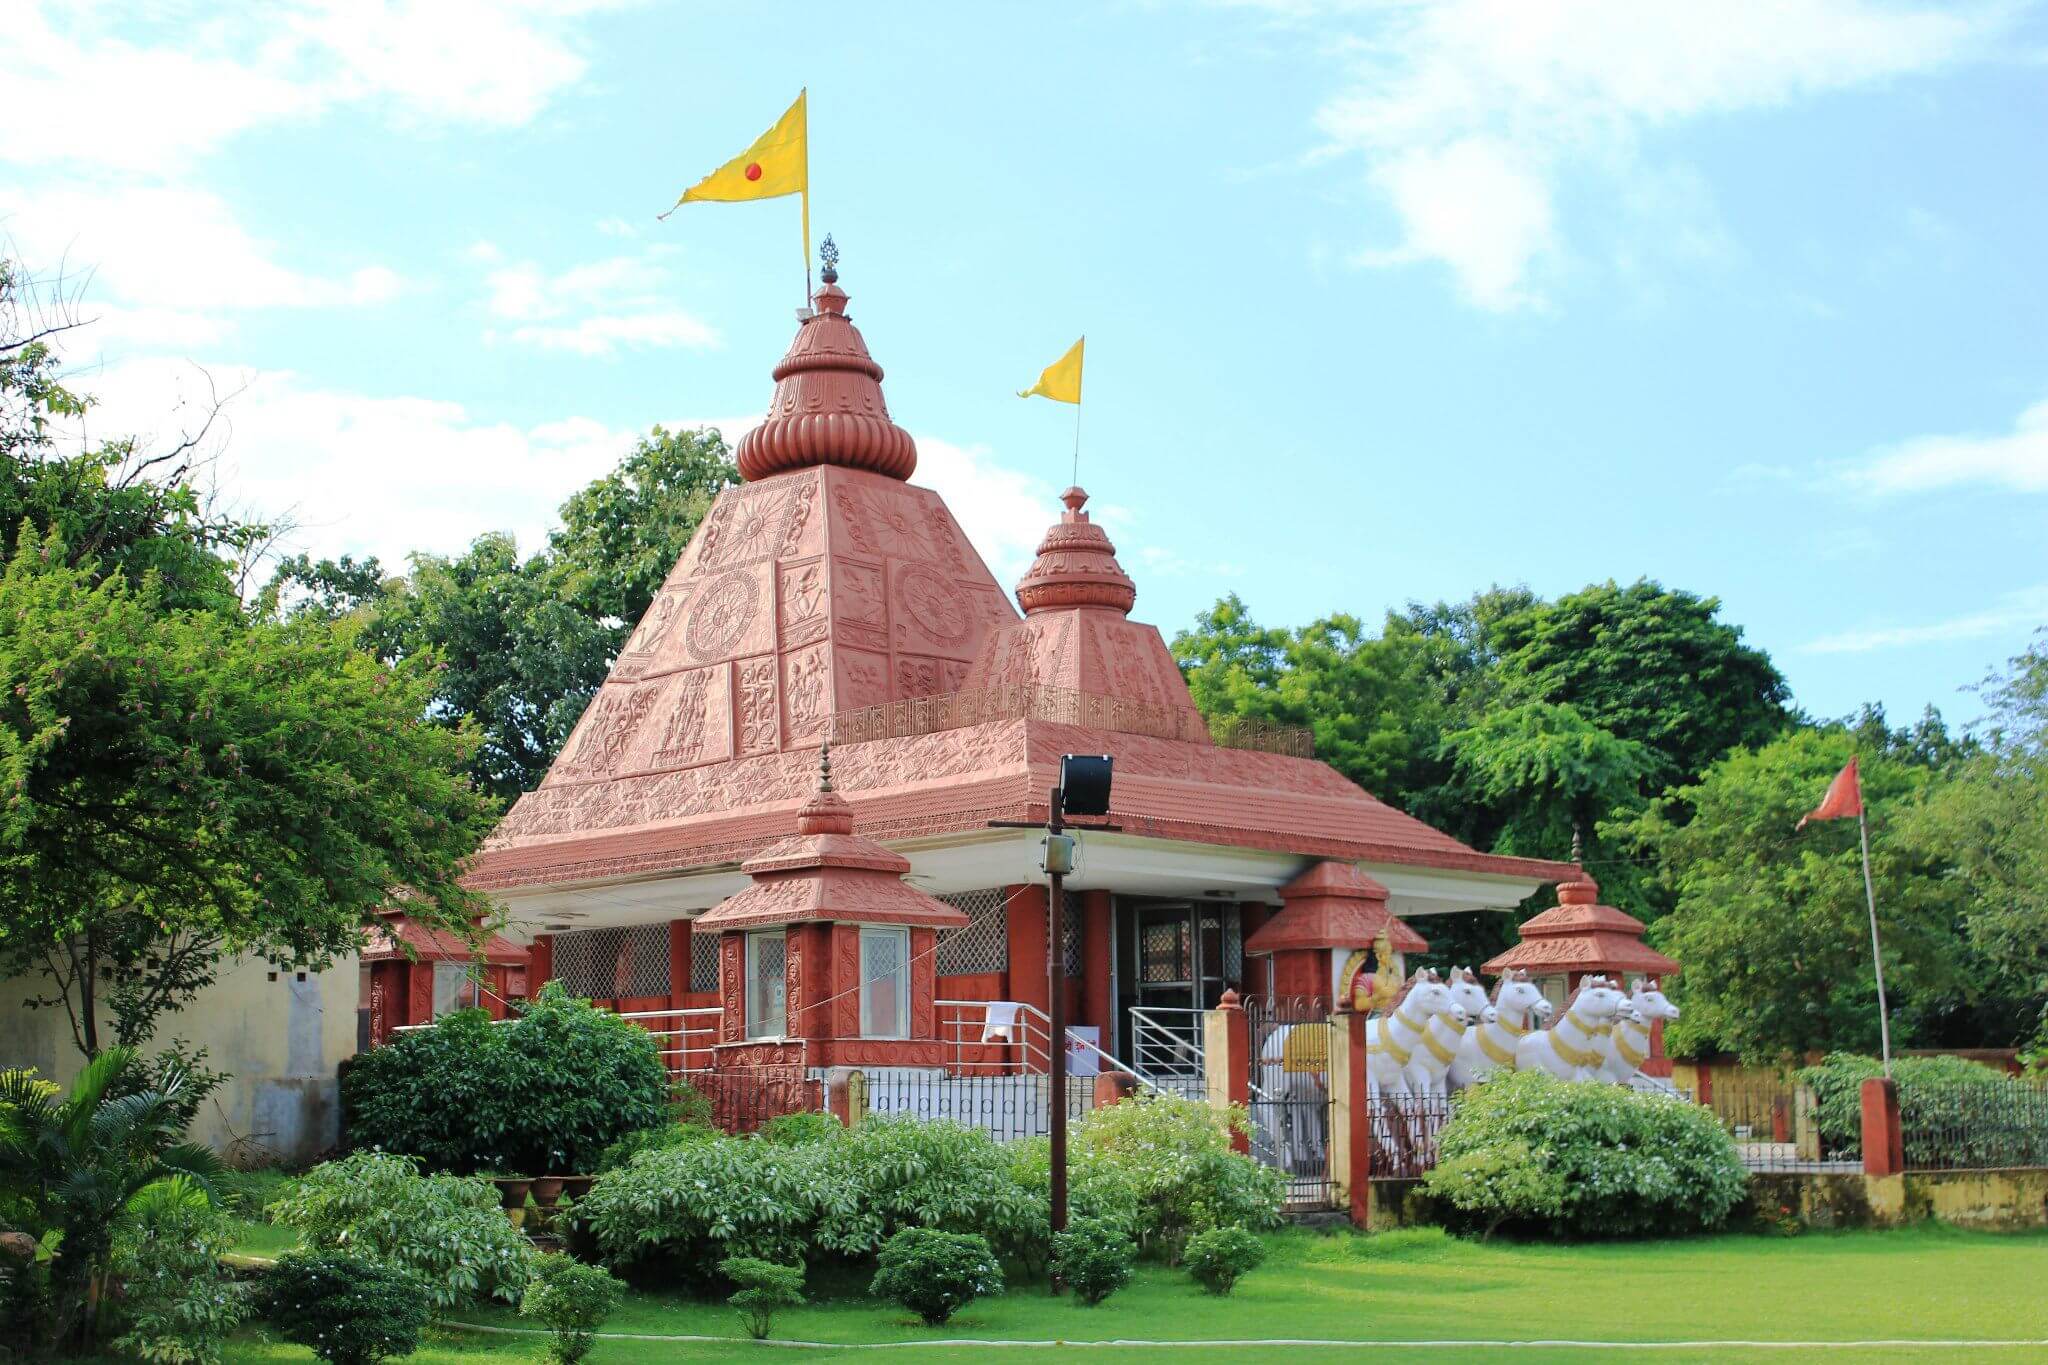 Surya Mandir, Jamshedpur to Visit, How to reach, Things to do, Photo